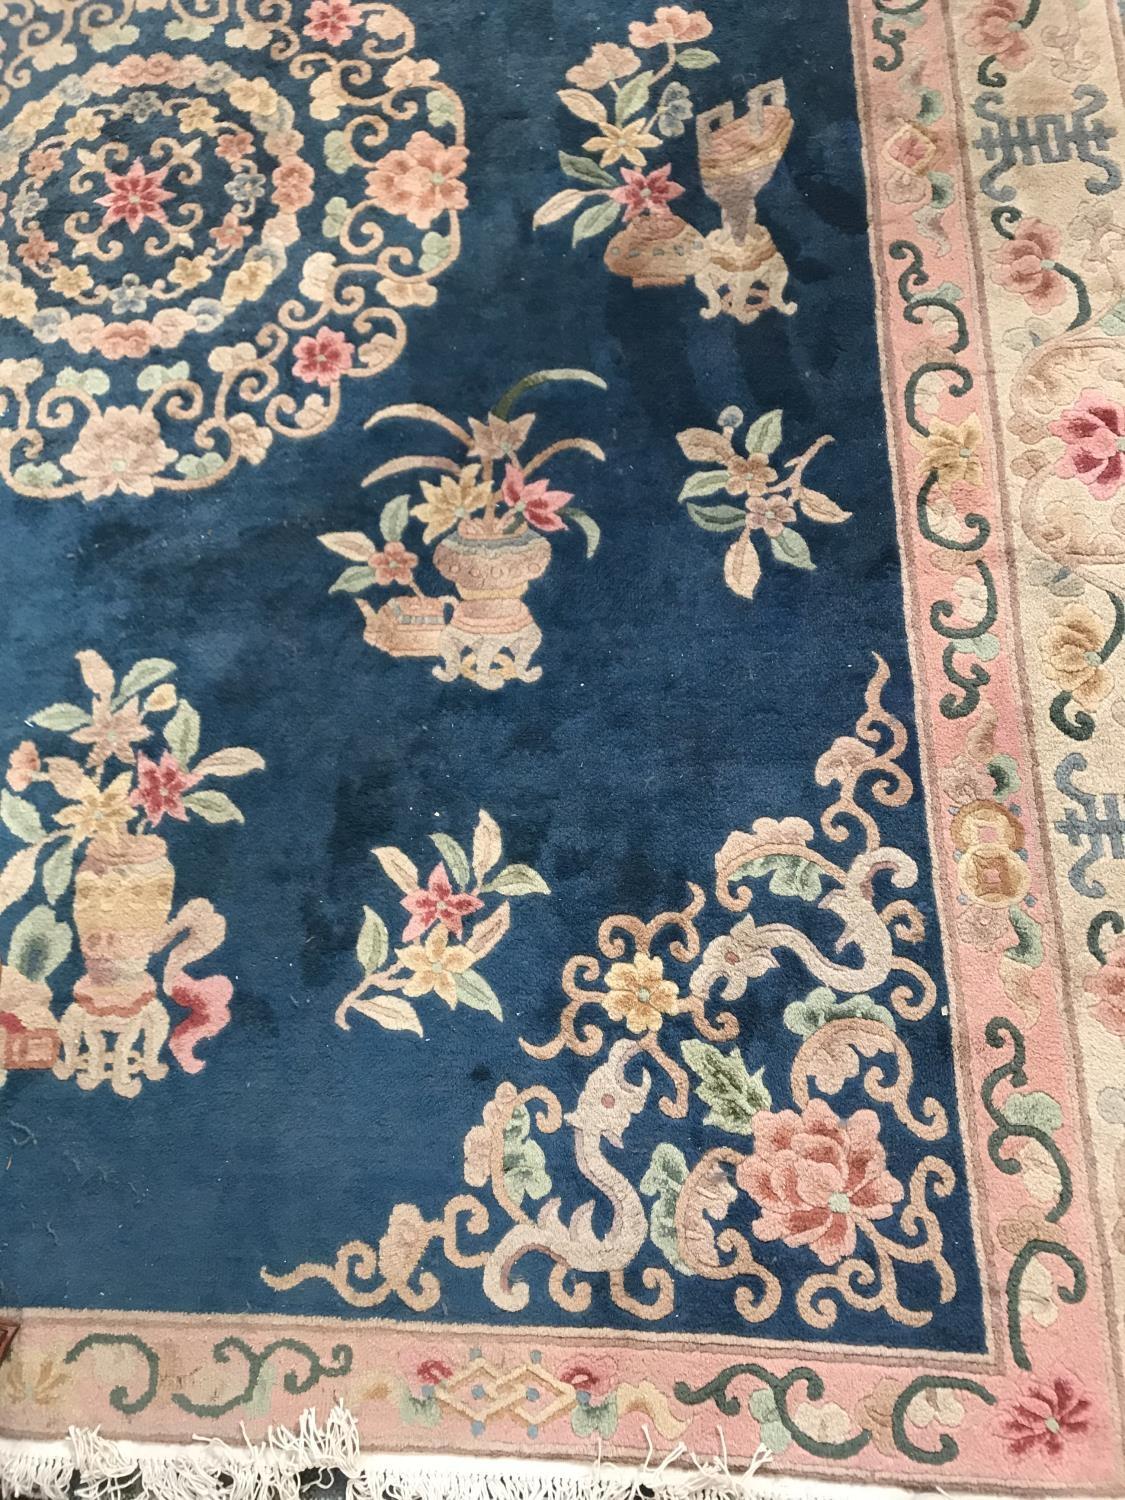 LARGE CHINESE STYLE RUG with a Royal blue ground decorated with floral motifs, encased in a floral